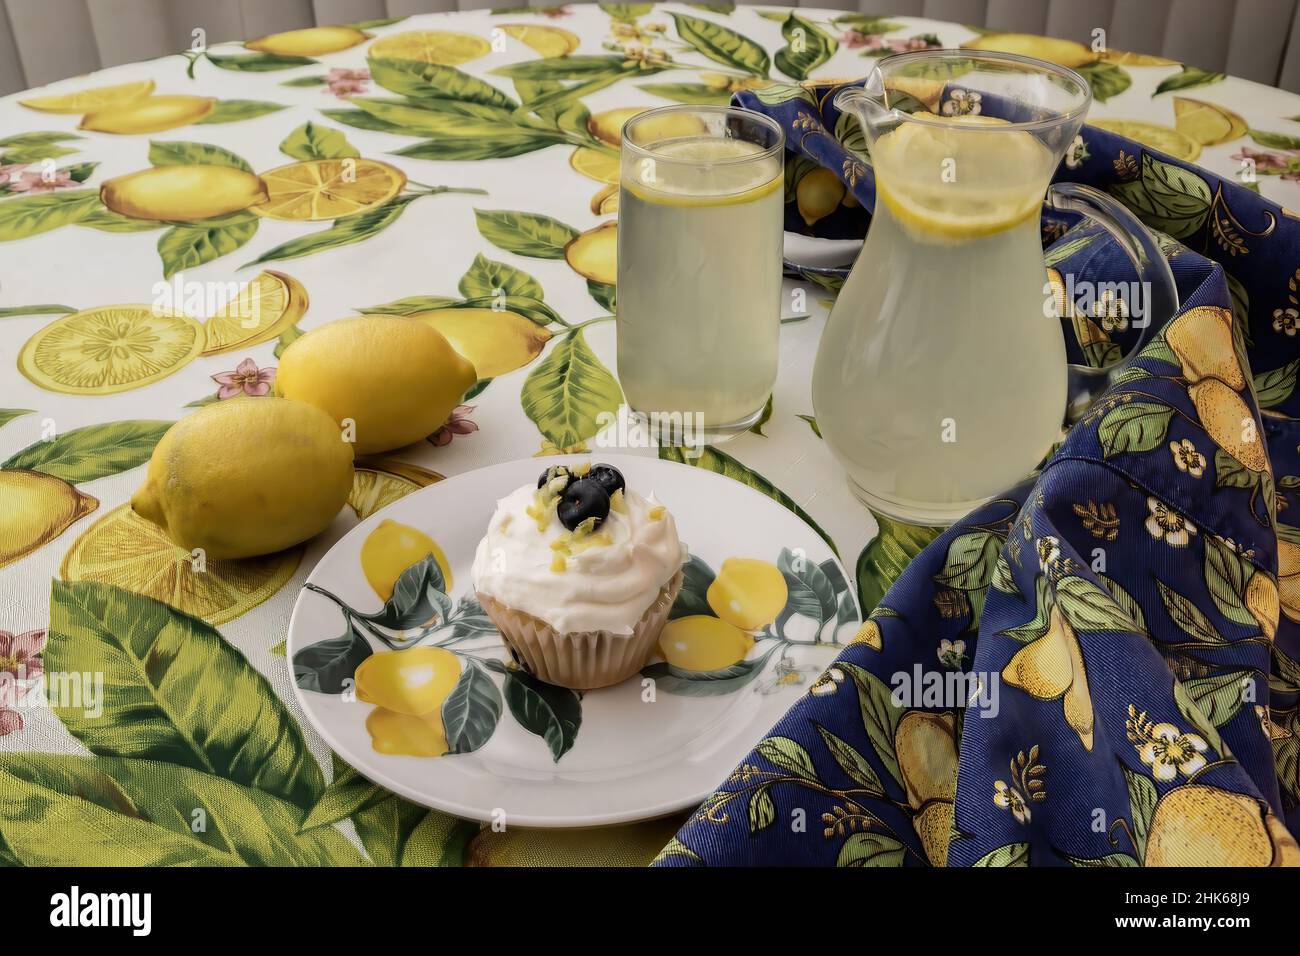 Lemon blueberry cupcake with blueberries and lemon zest with lemons and lemonade on decorative plate and tablecloths. Stock Photo